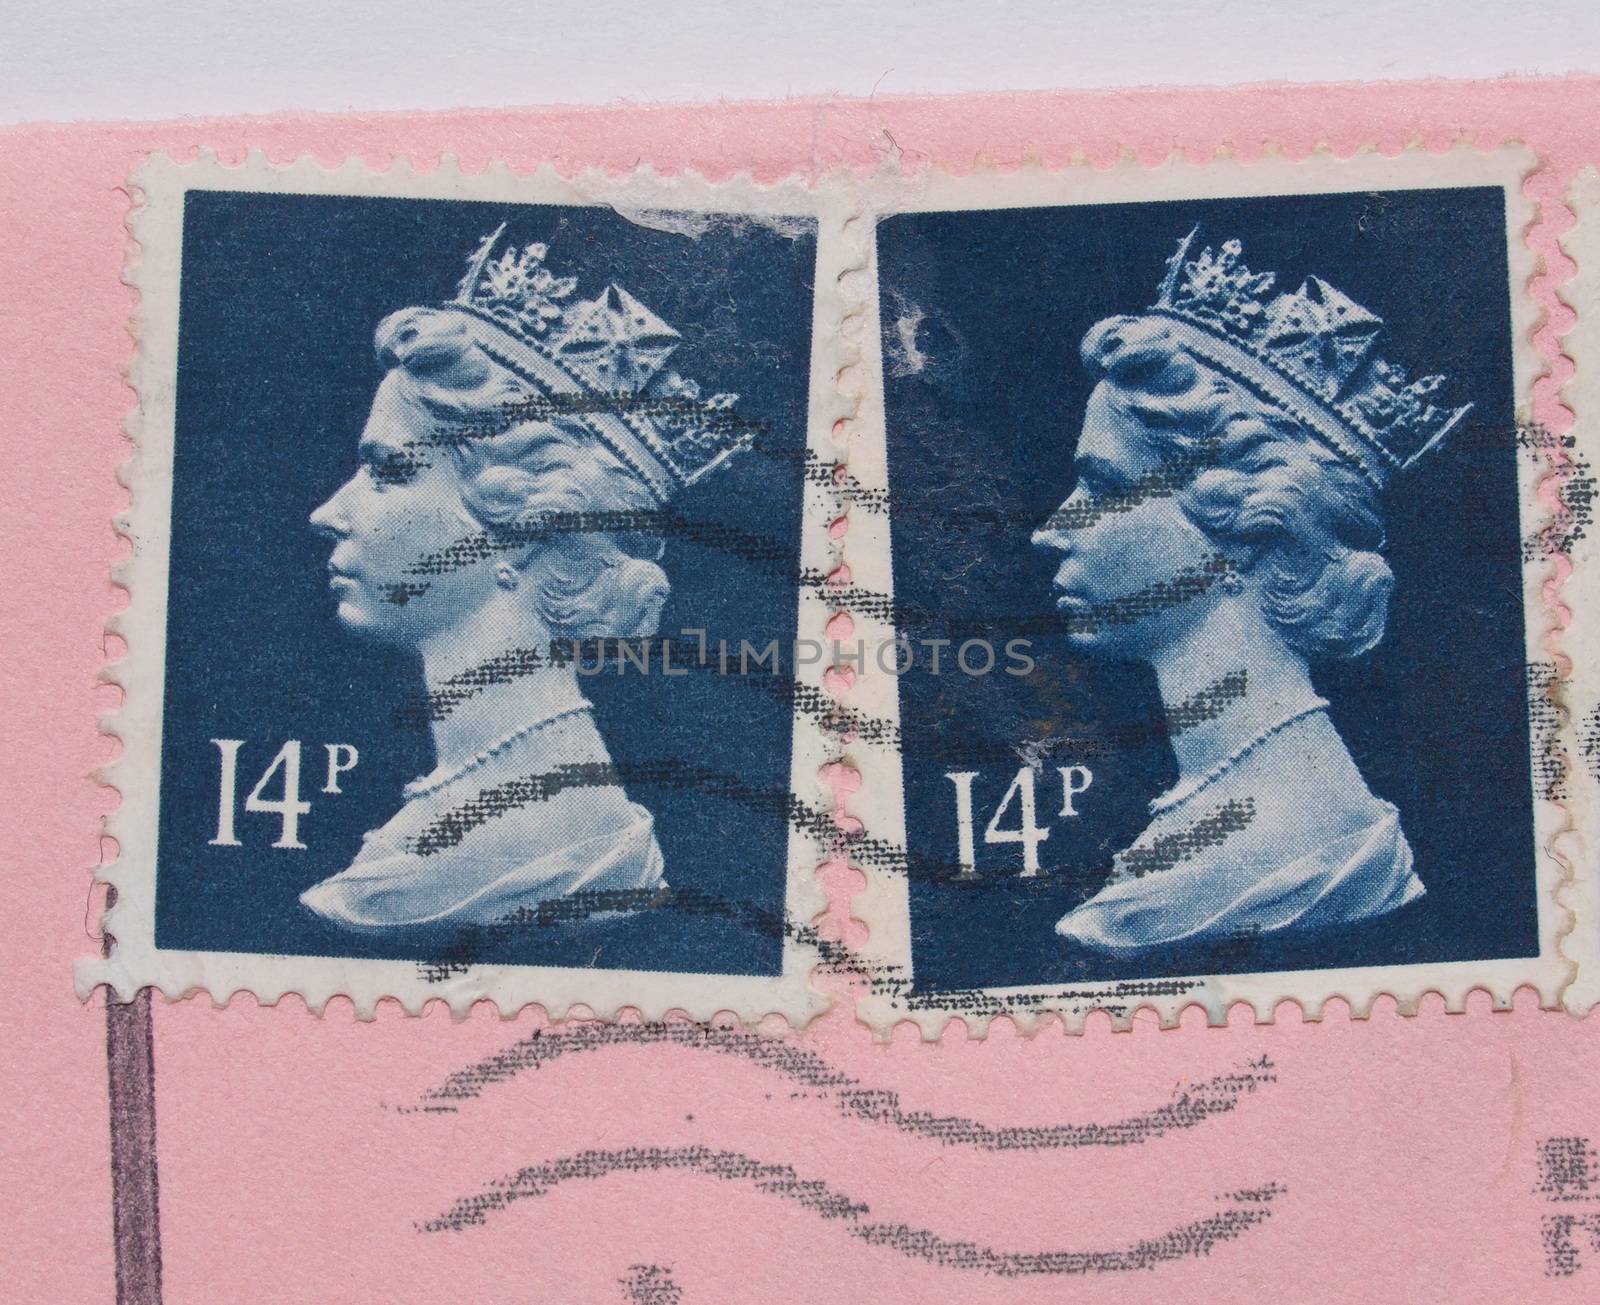 LONDON, UNITED KINGDOM - CIRCA MAY 2015: Stamps printed by Unite by paolo77